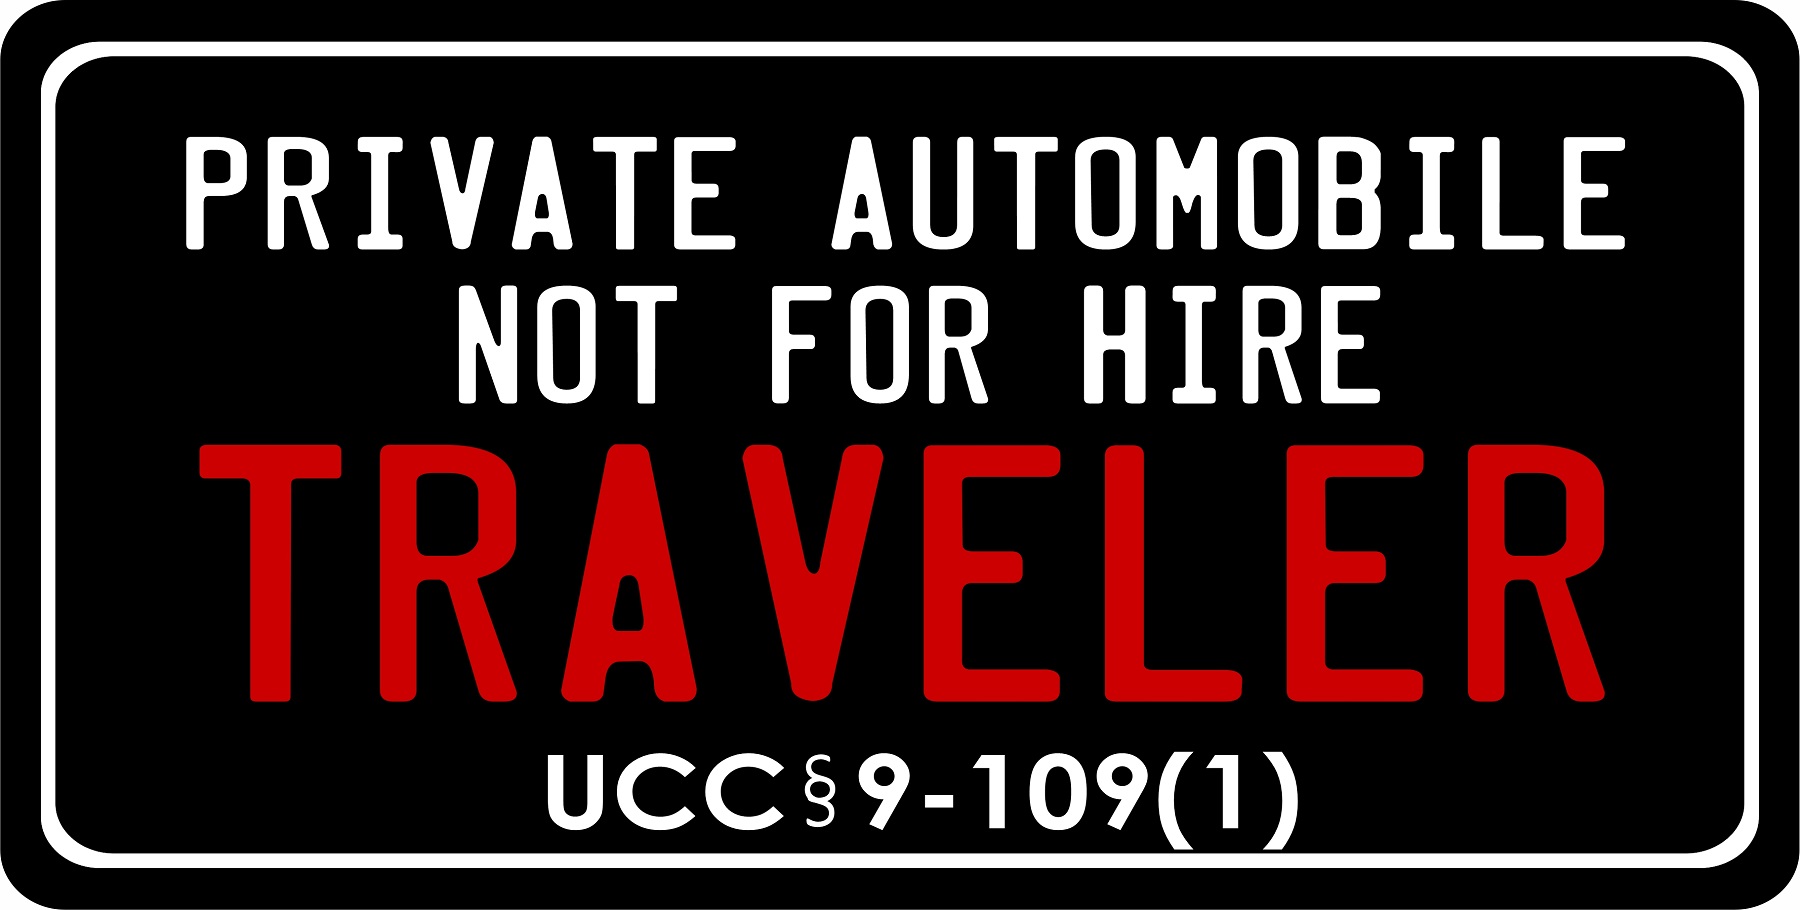 Not For Hire Traveler Black Photo LICENSE PLATE